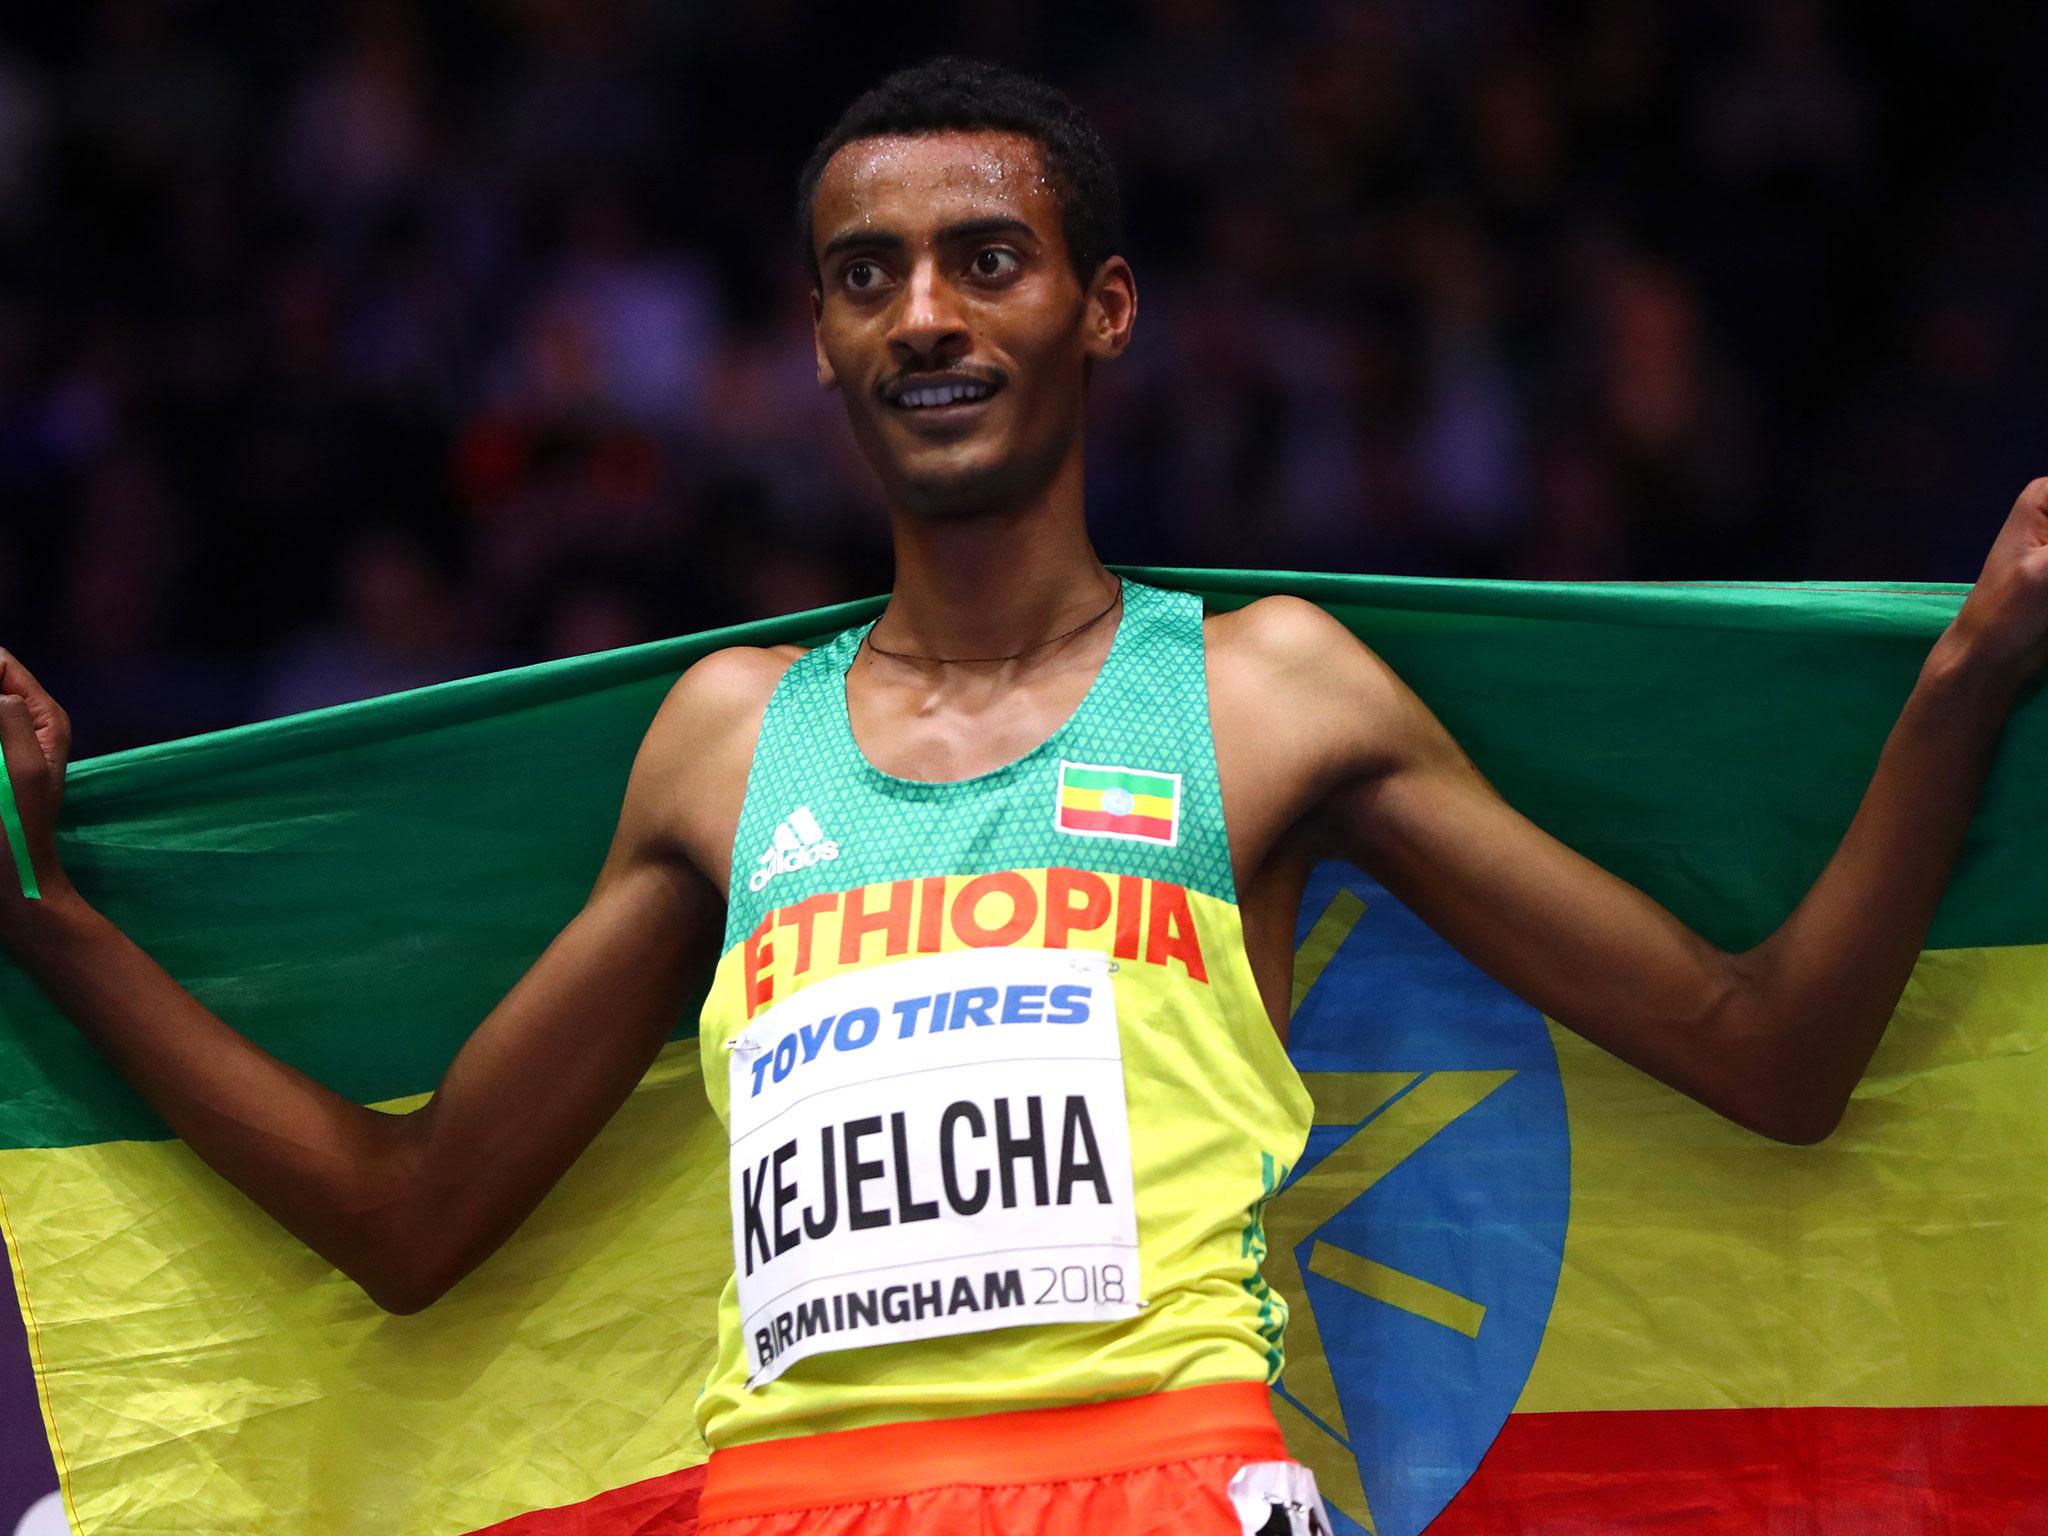 Speaking after winning the men’s 3,000m, Kejelcha told The Independent that his nation’s athletes are fuelled by the incentive of being given land bonuses by the government – not drugs